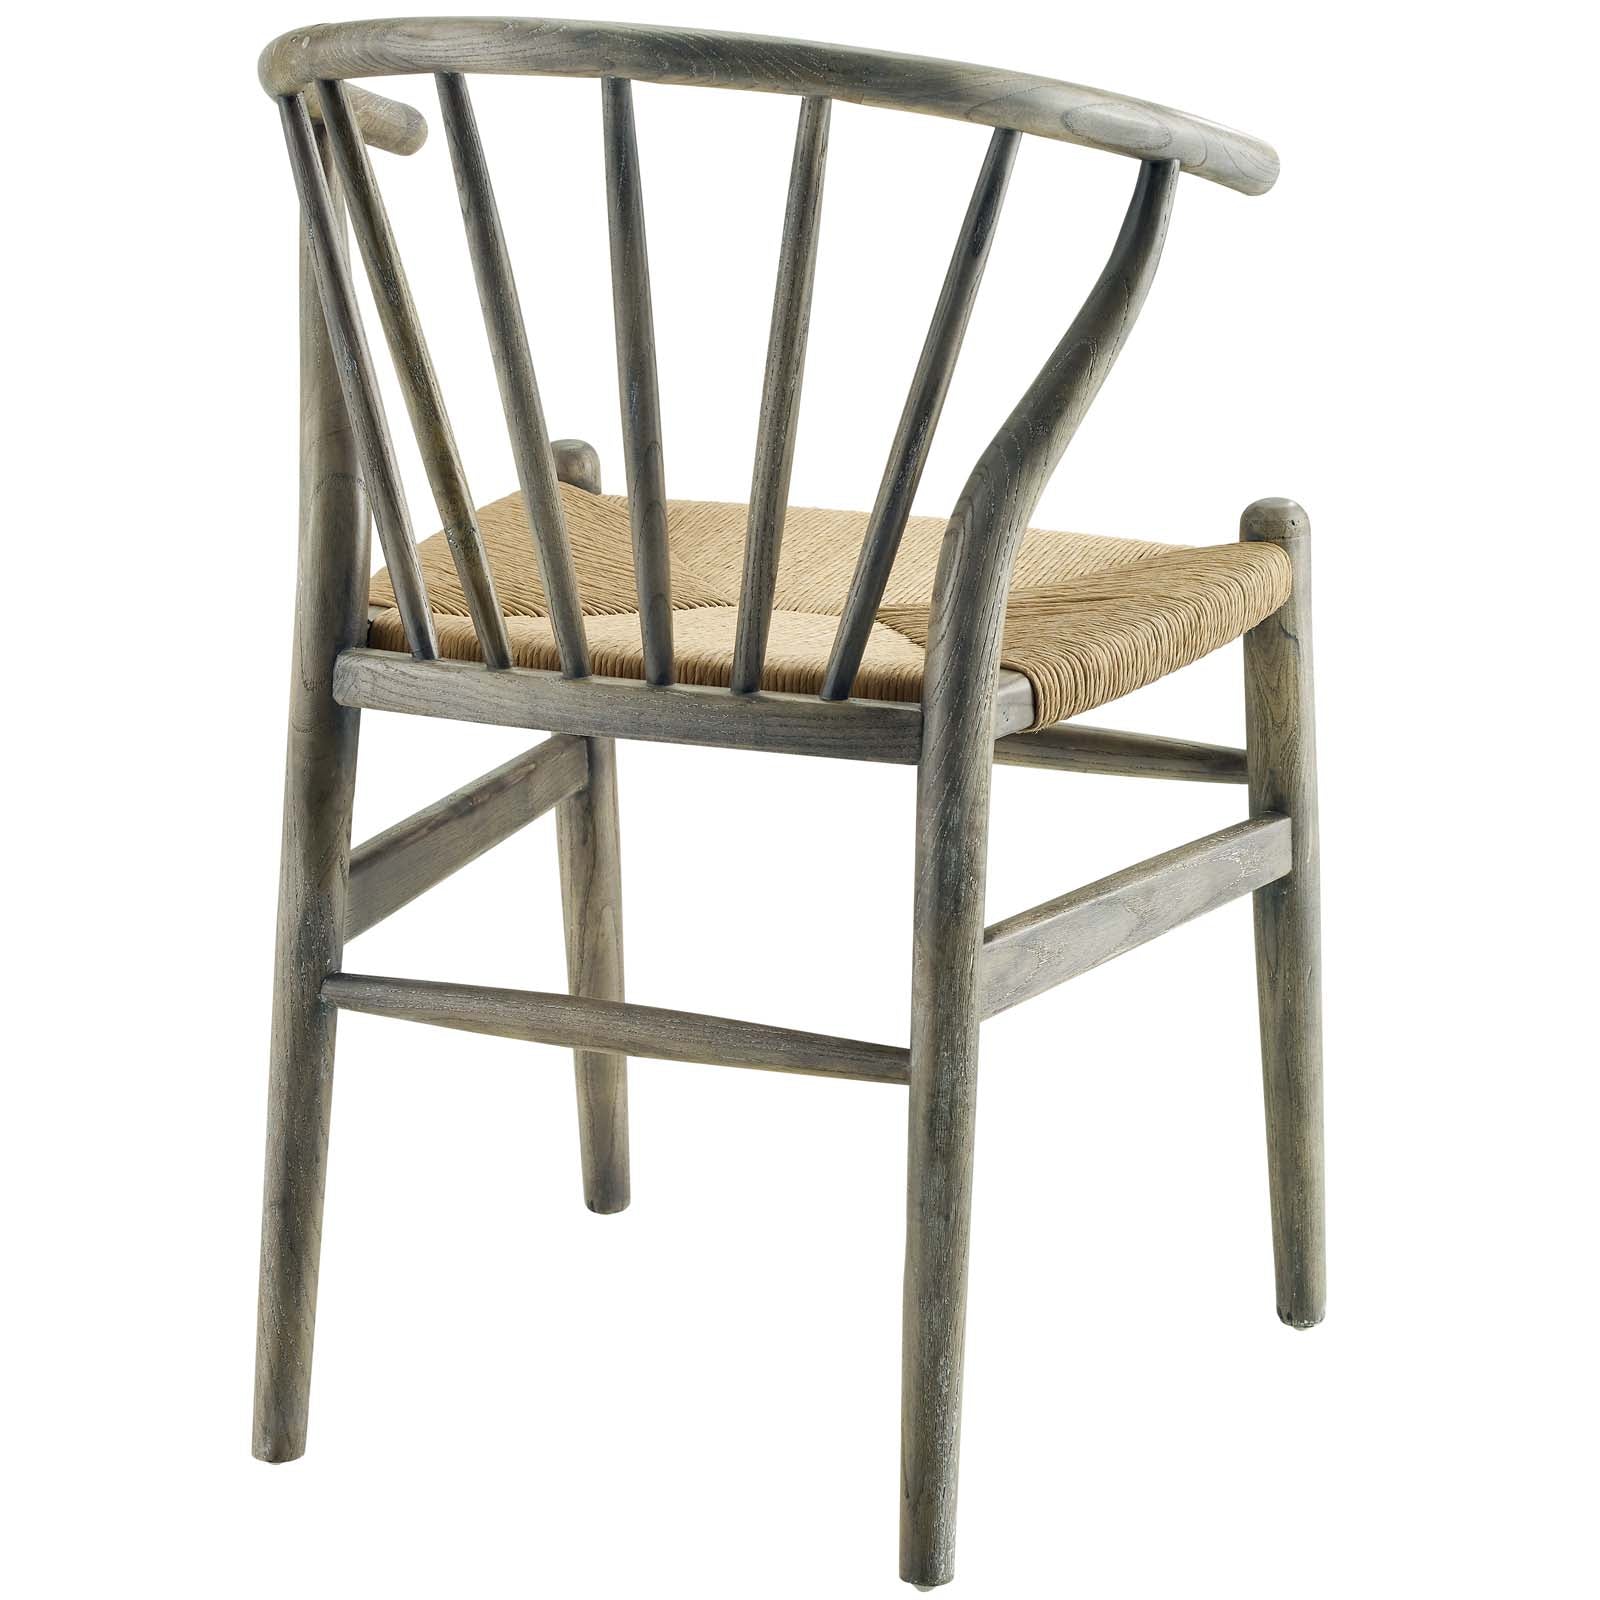 Flourish Spindle Wood Dining Side Chair Set of 2 - East Shore Modern Home Furnishings